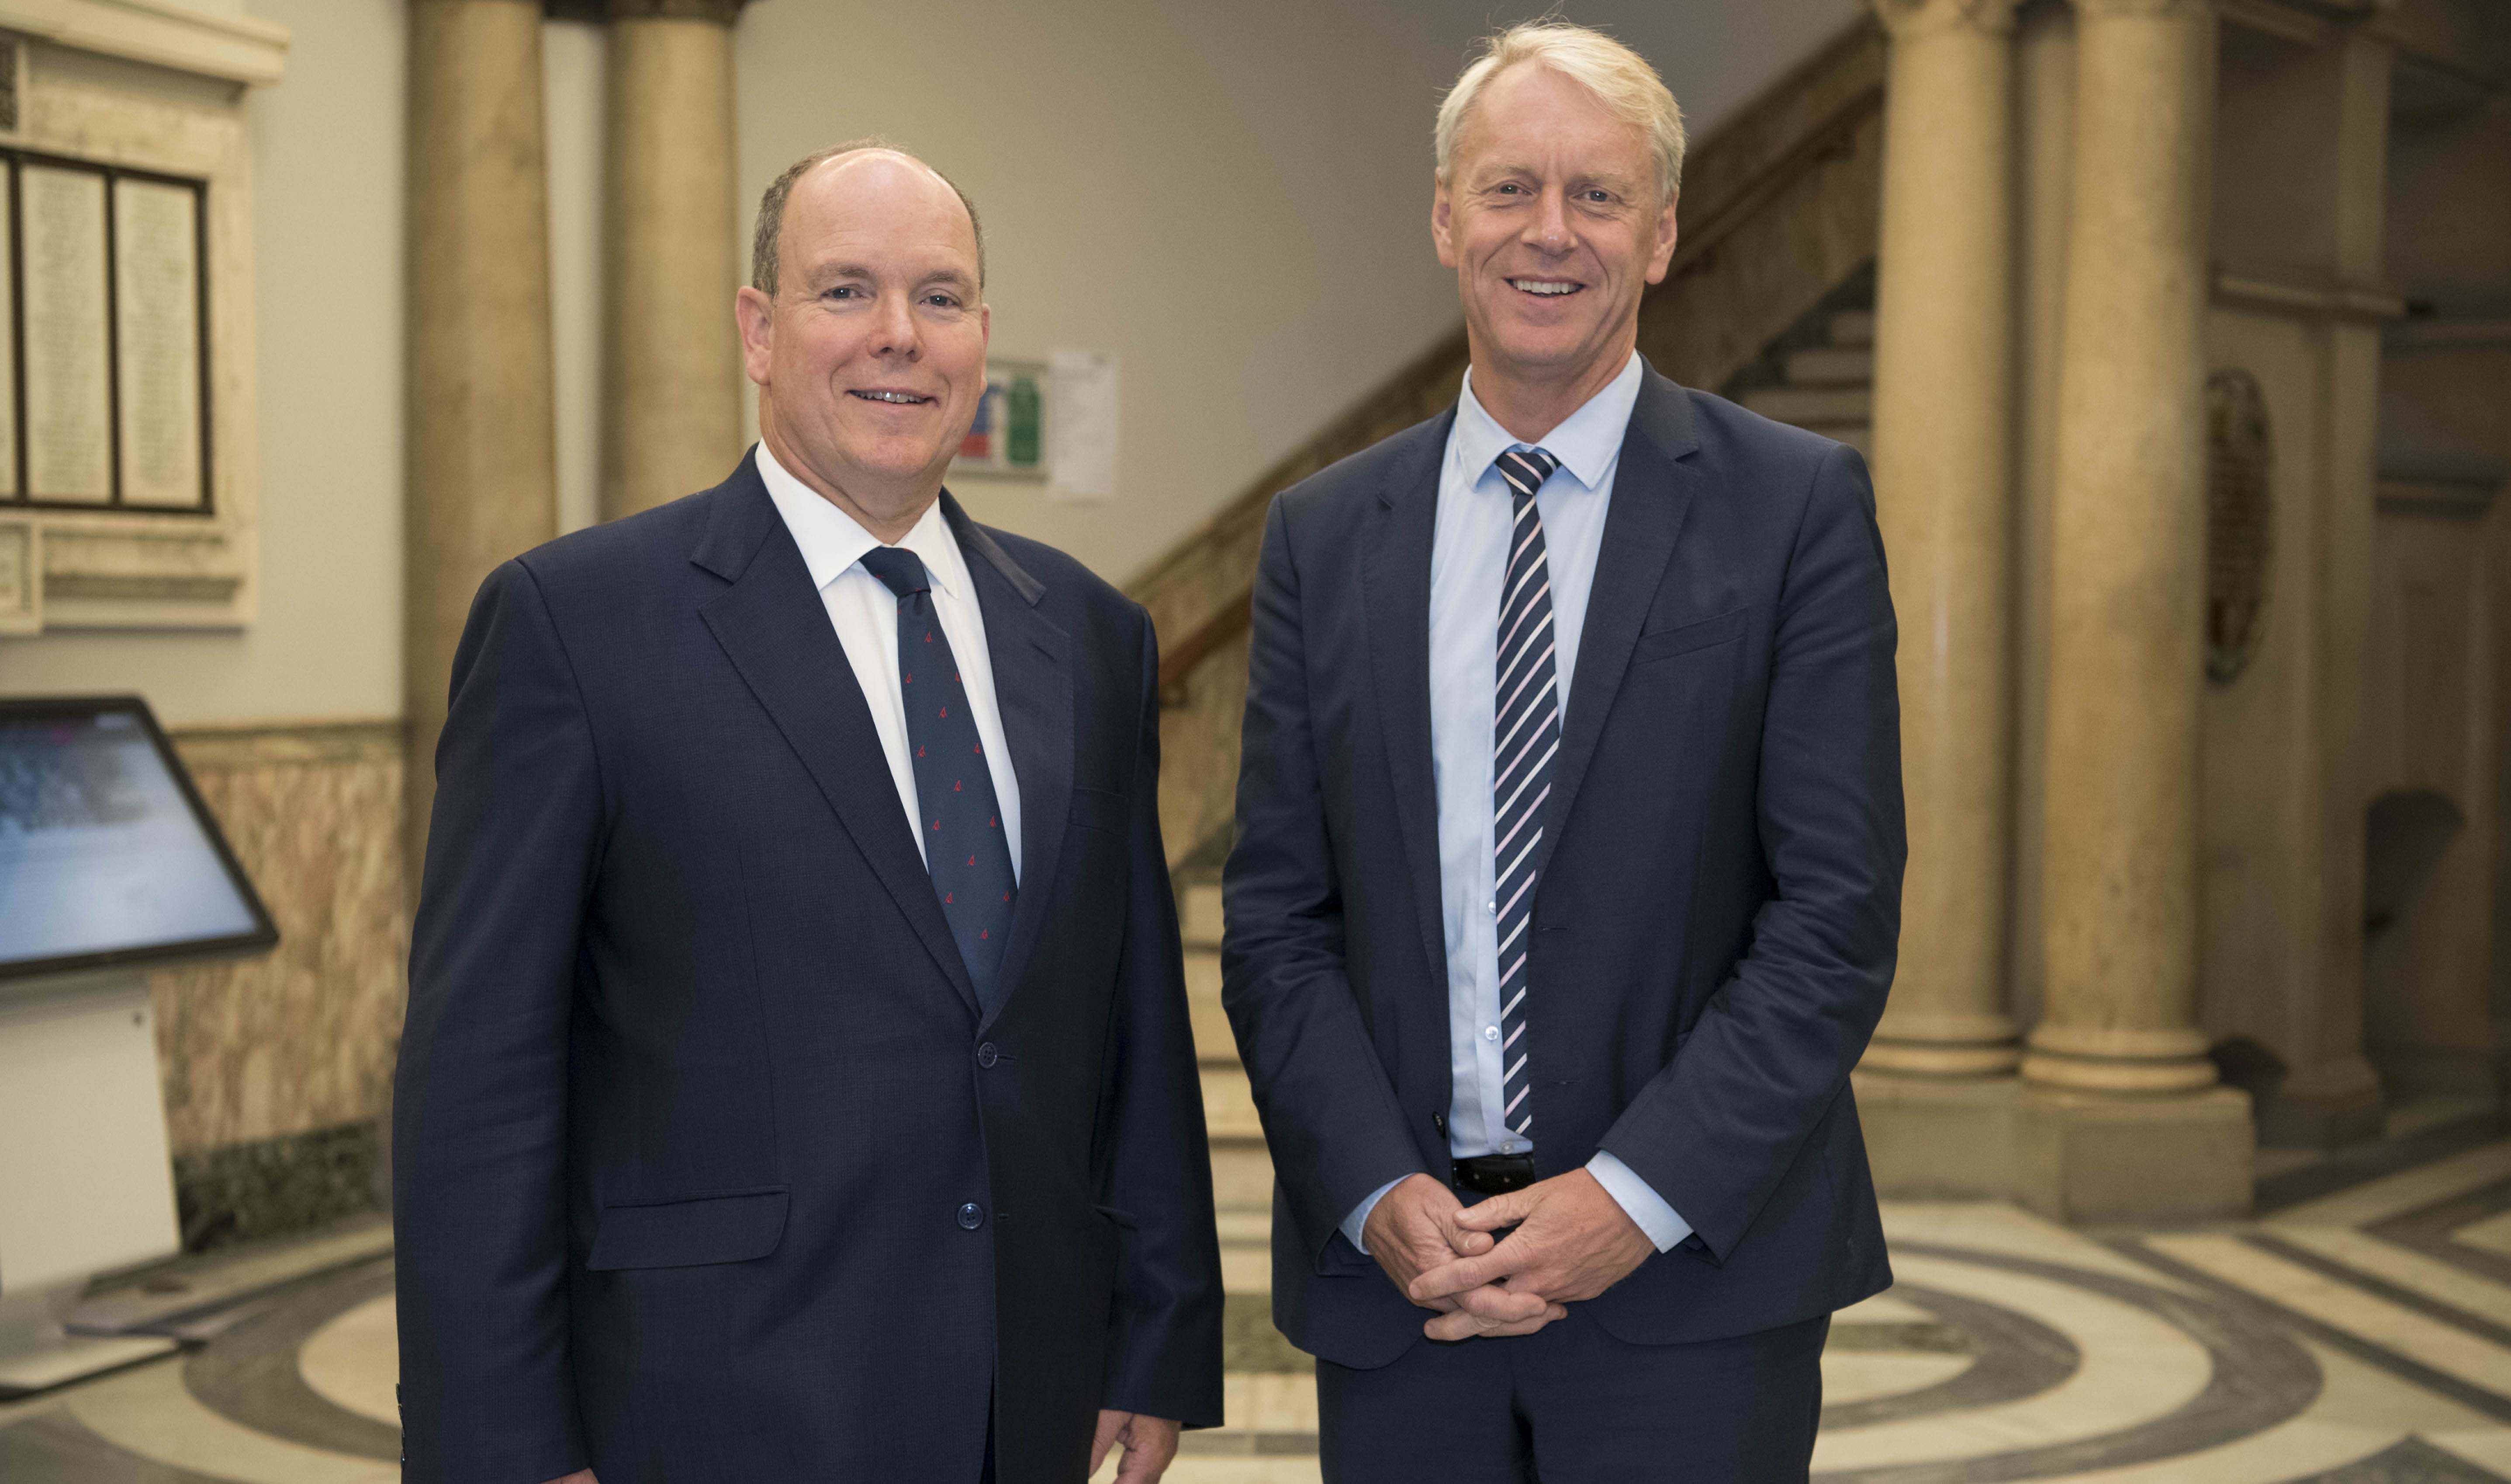 His Serene Highness Prince Albert II of Monaco with Newcastle University Vice-Chancellor and President, Professor Chris Day standard